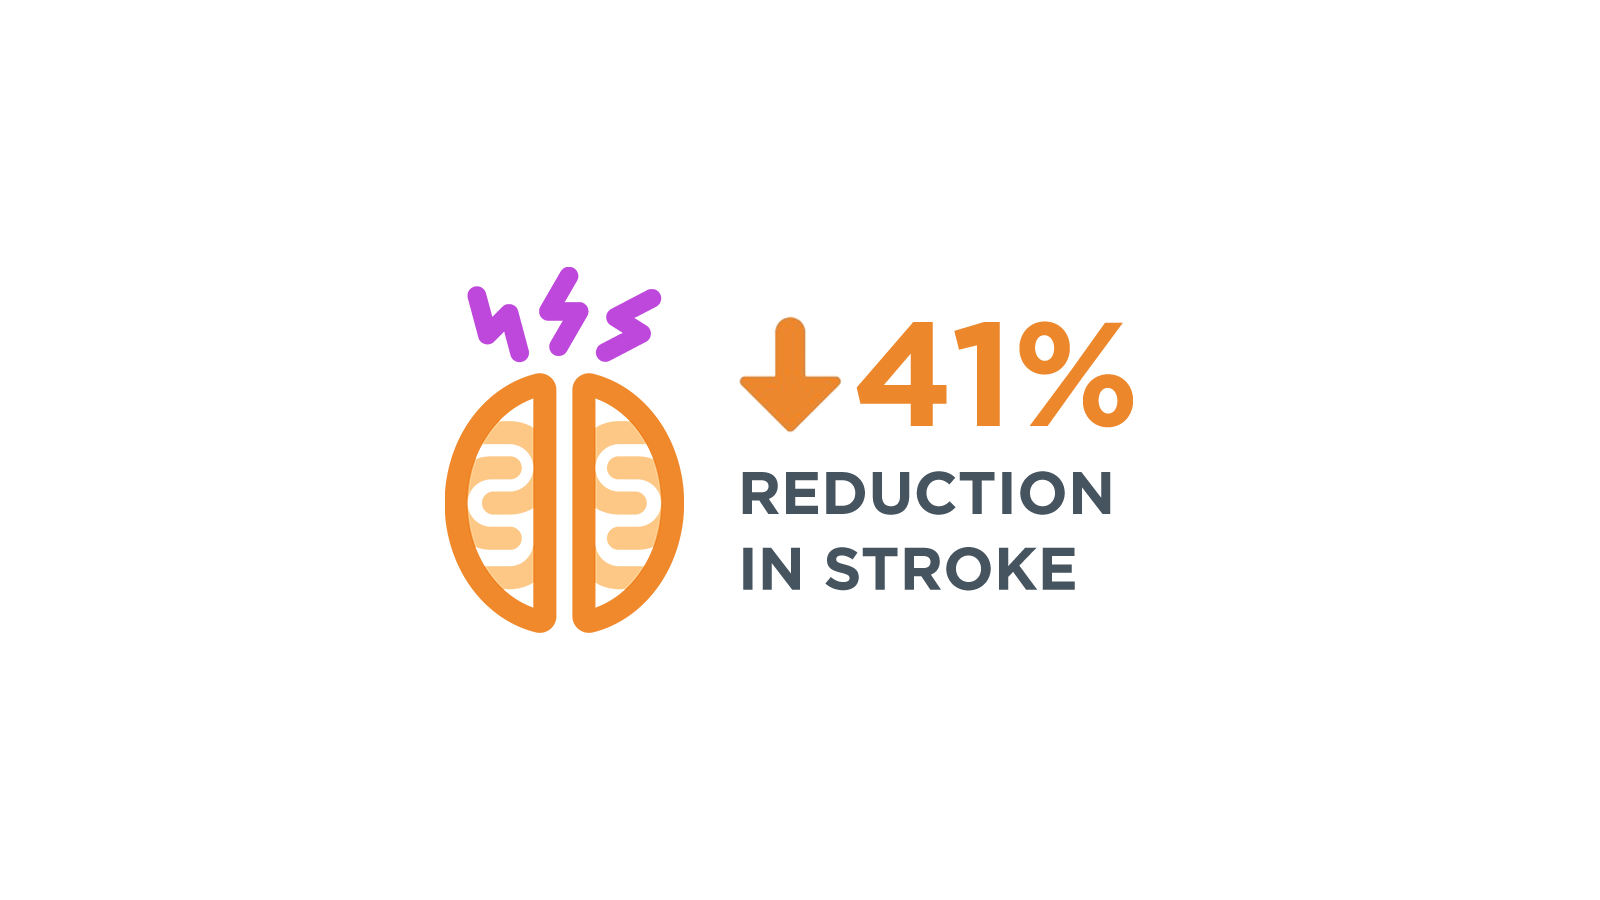 Infographic: Patients with AFib have an increased risk for life-threatening complications, including up to 5x increase in stroke. Talk to your doctor about potential AFib risks and AFib treatment options.